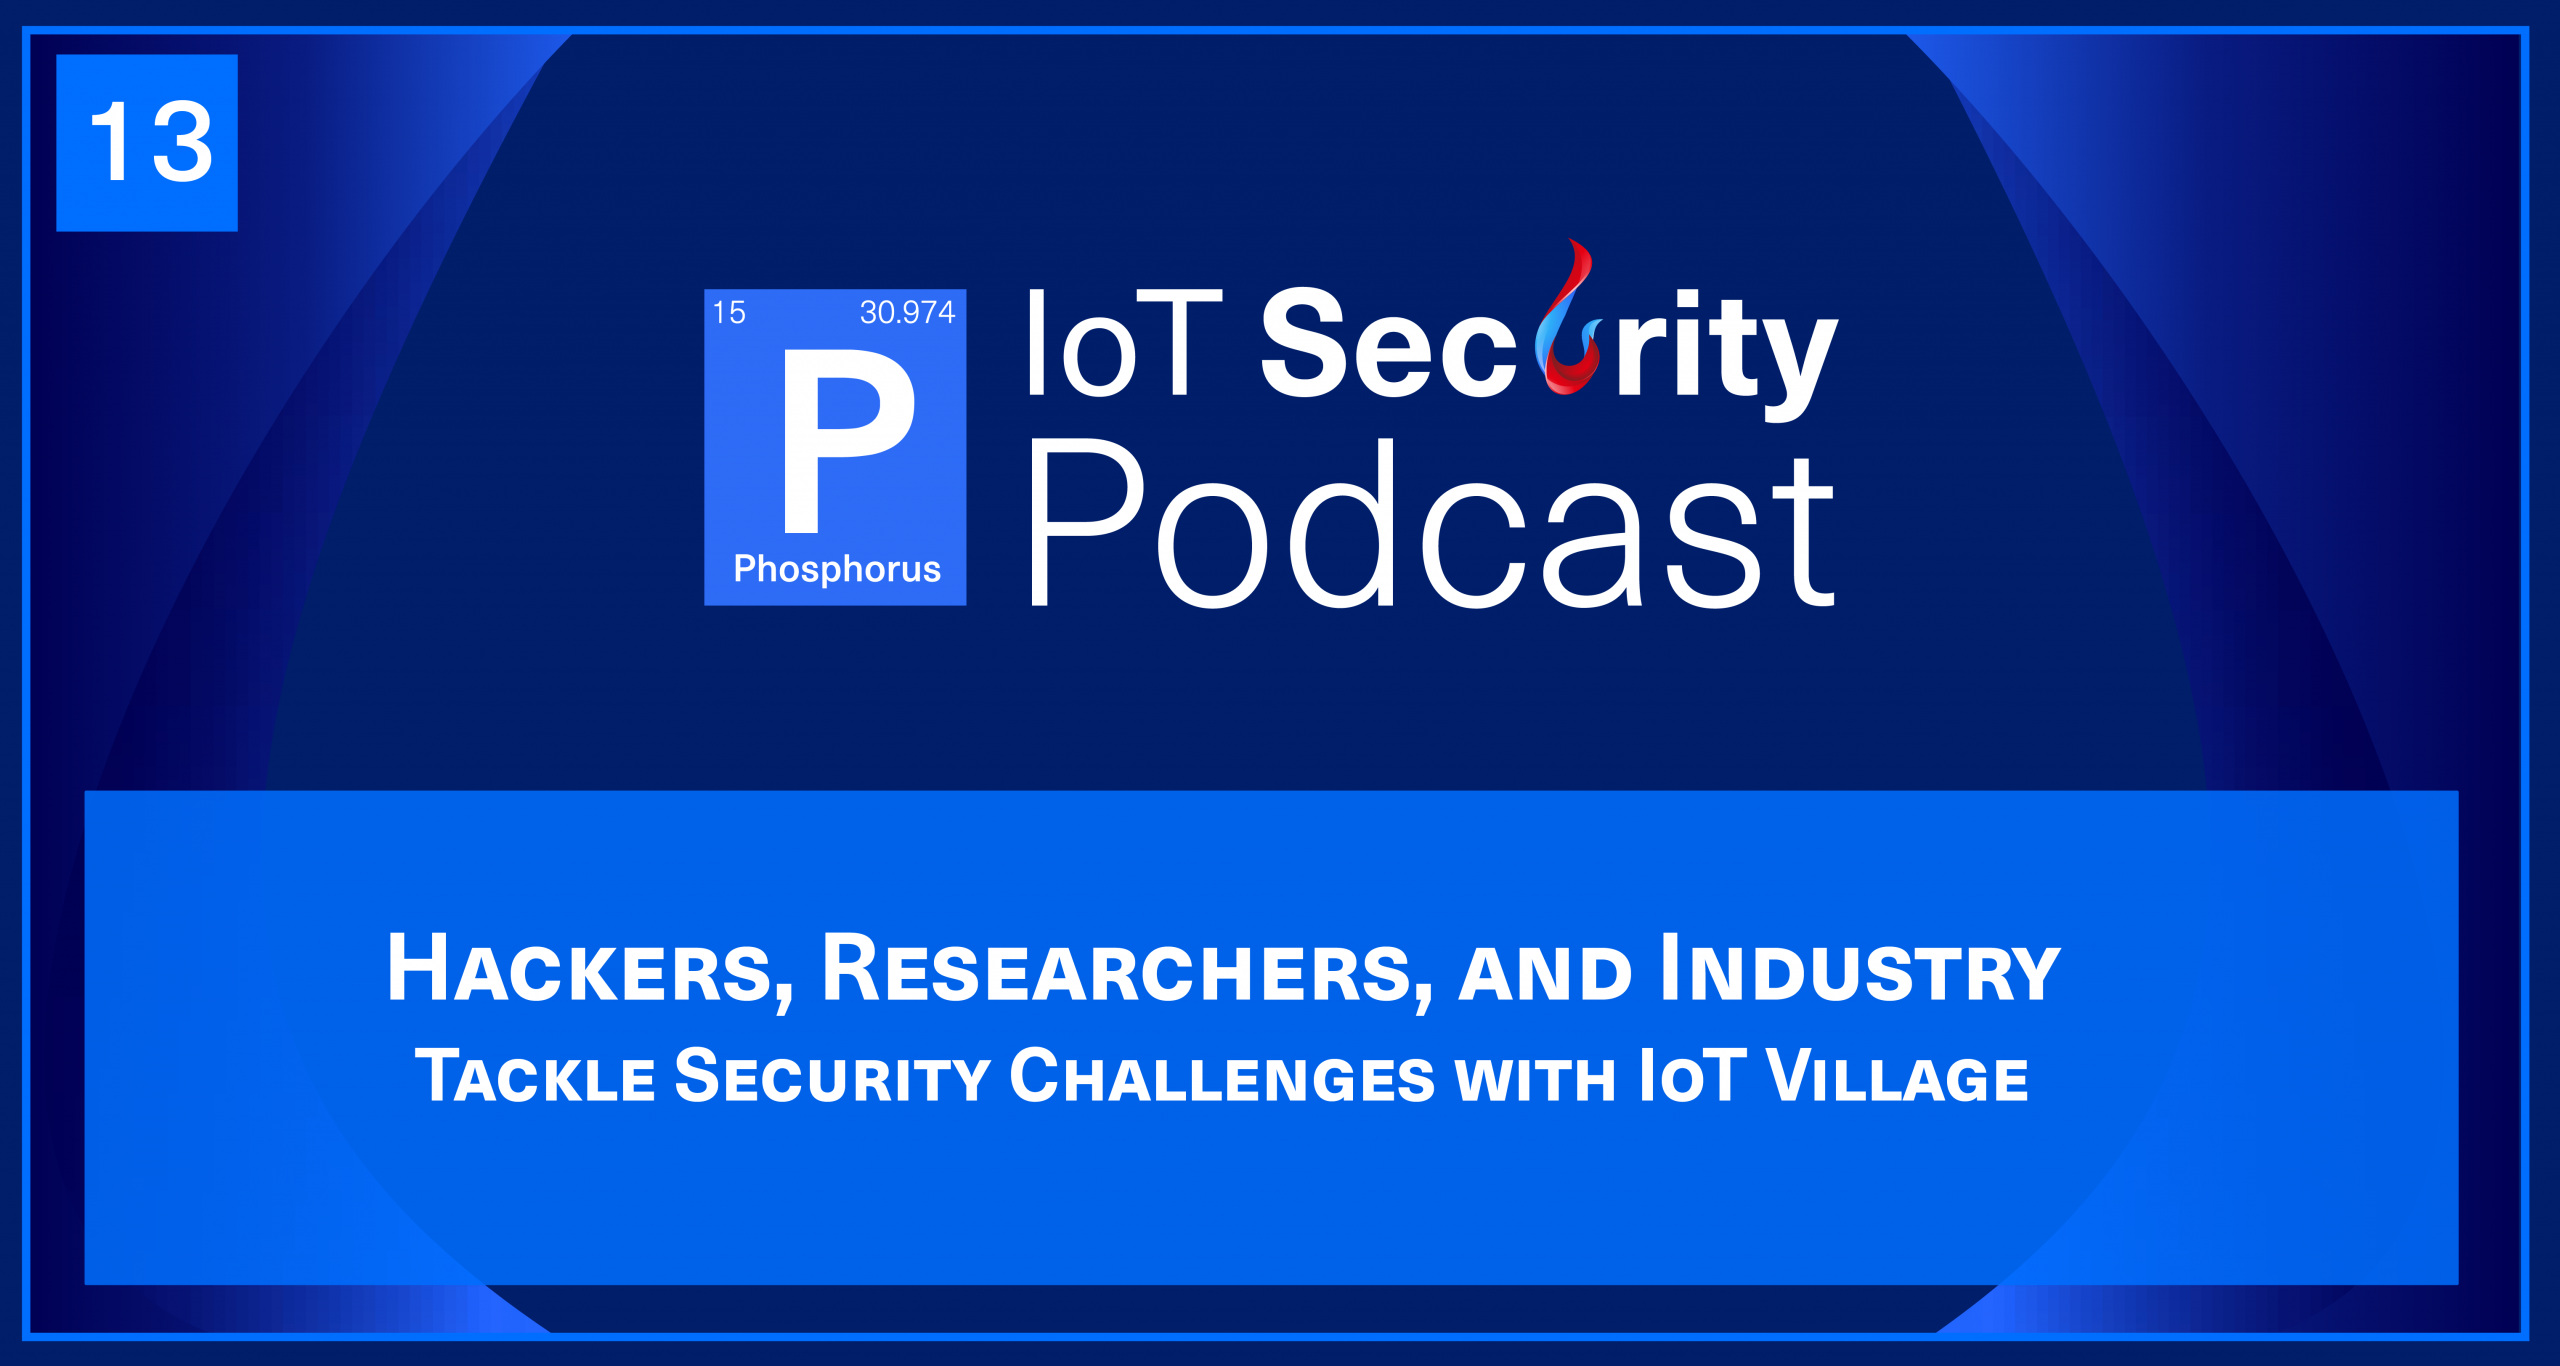 Hackers, Researchers, and Industry Tackle Security Challenges with IoT Village